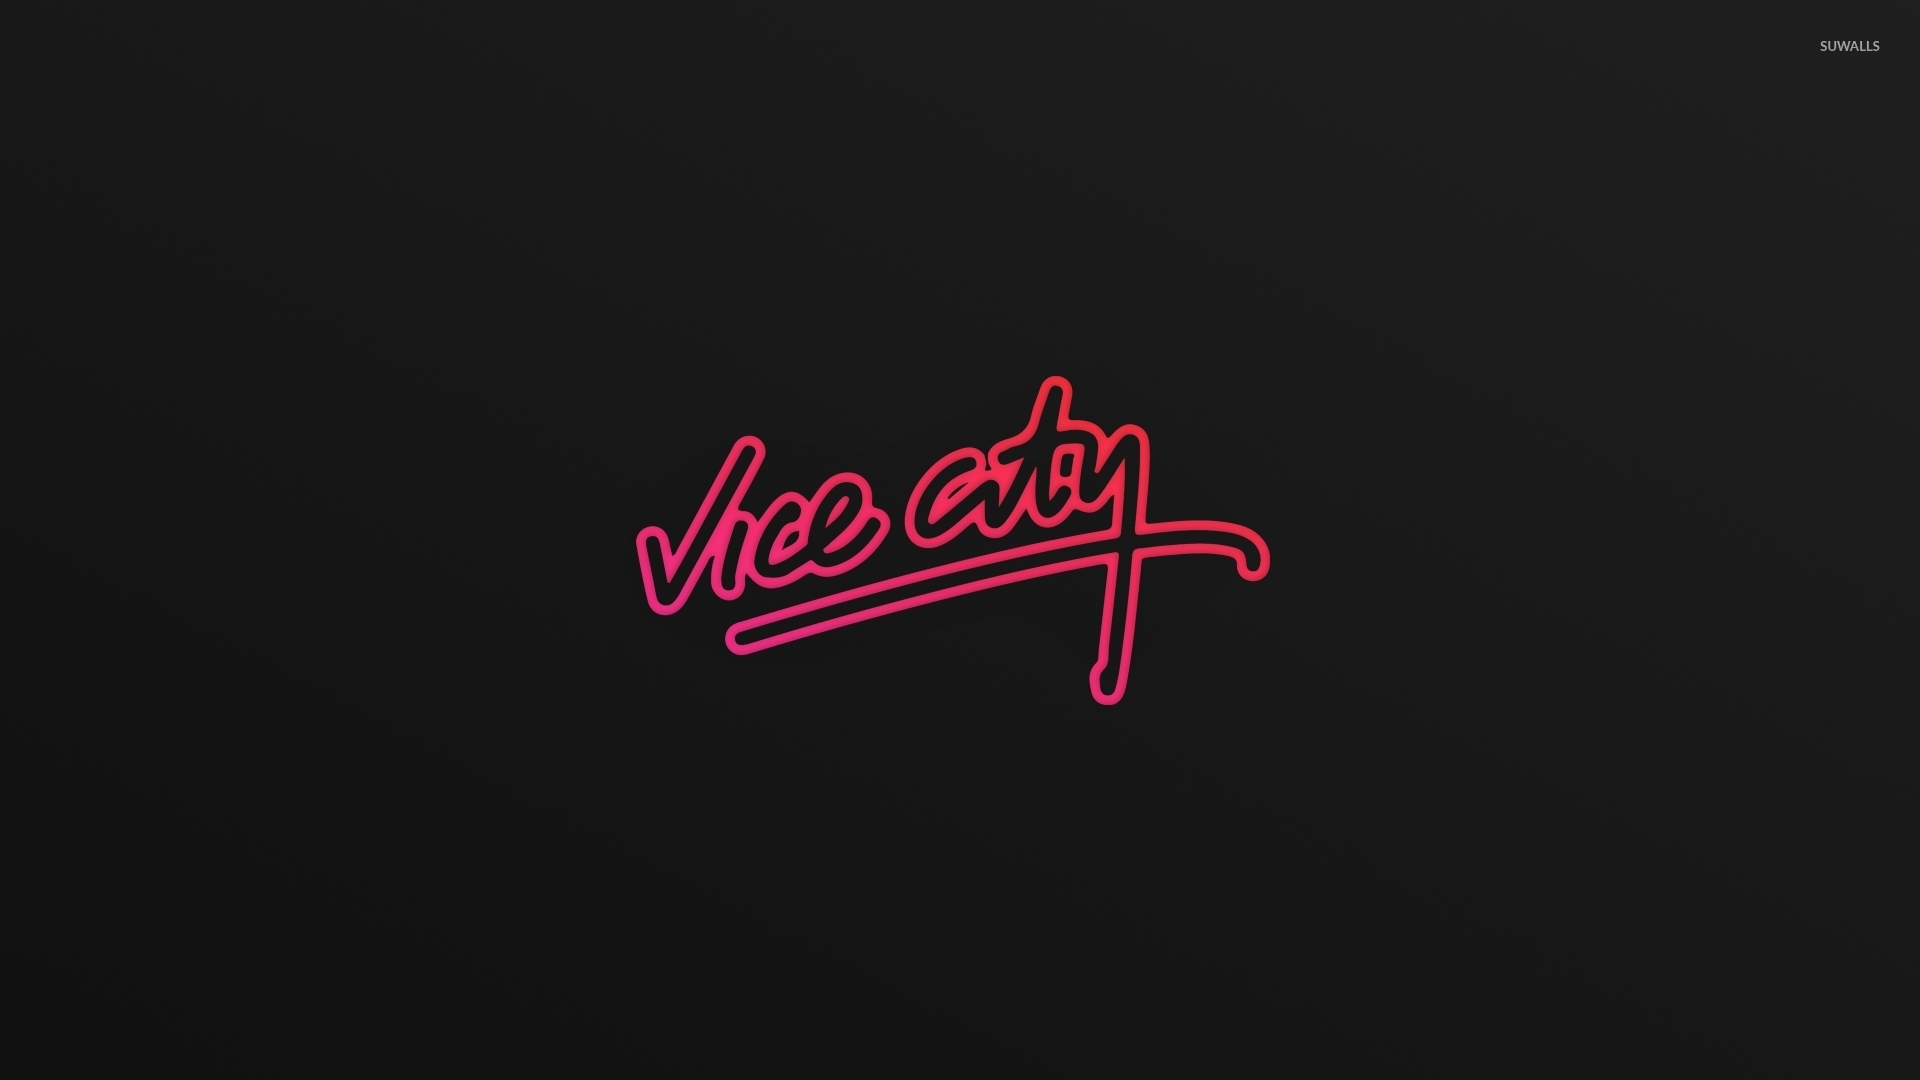 Grand Theft Auto: Vice City wallpaper - Game wallpapers - #41438